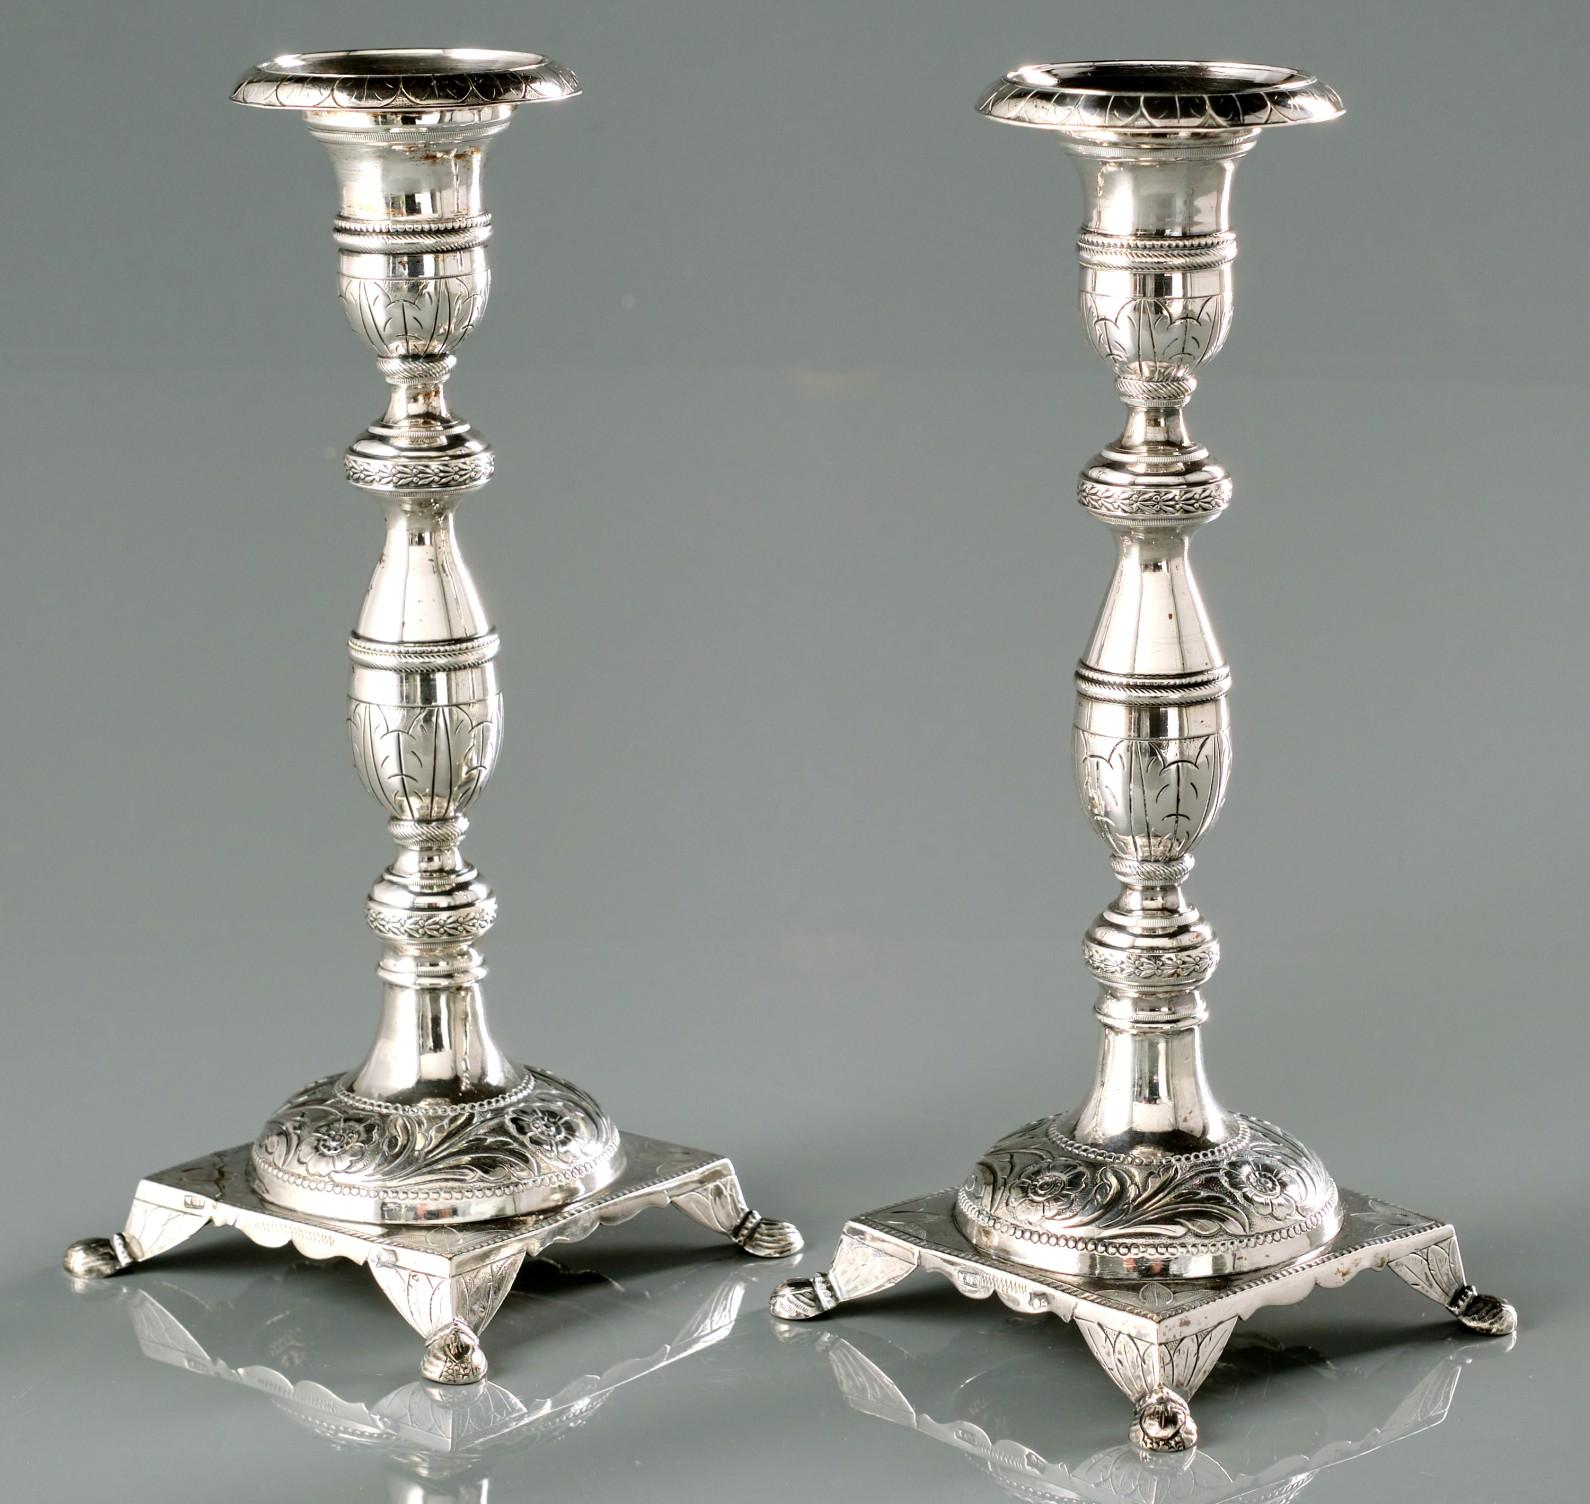 Other Very Good Pair of 19th Century Cast Portuguese Silver Shabbat Candlesticks